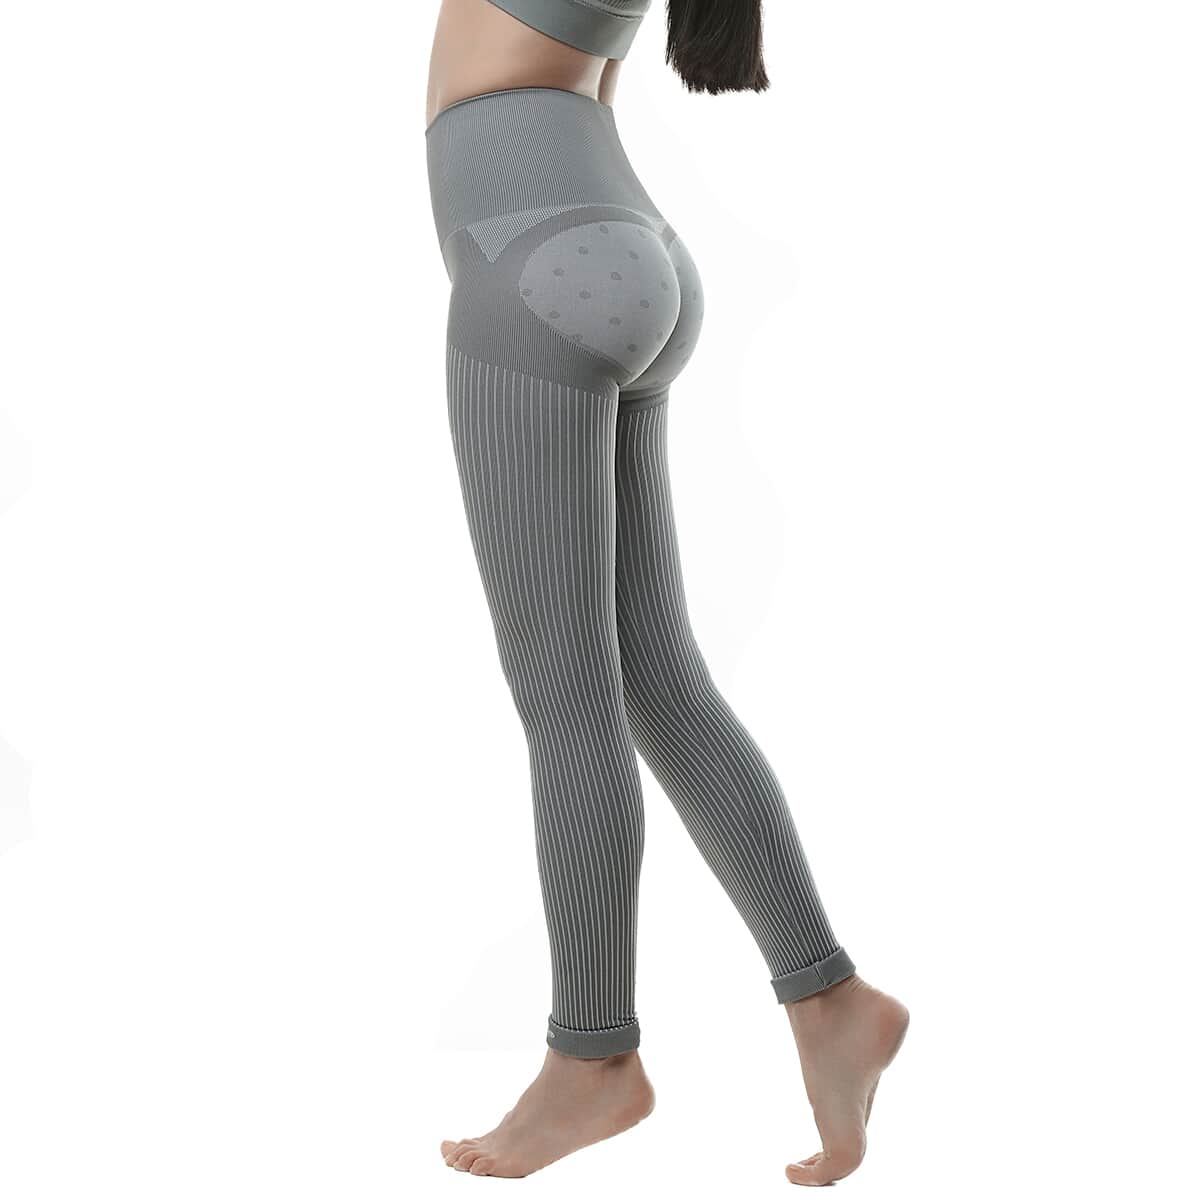 SANKOM Patent Gray Posture And Shaper Leggings For Women With Bamboo Fibers - M/L image number 1